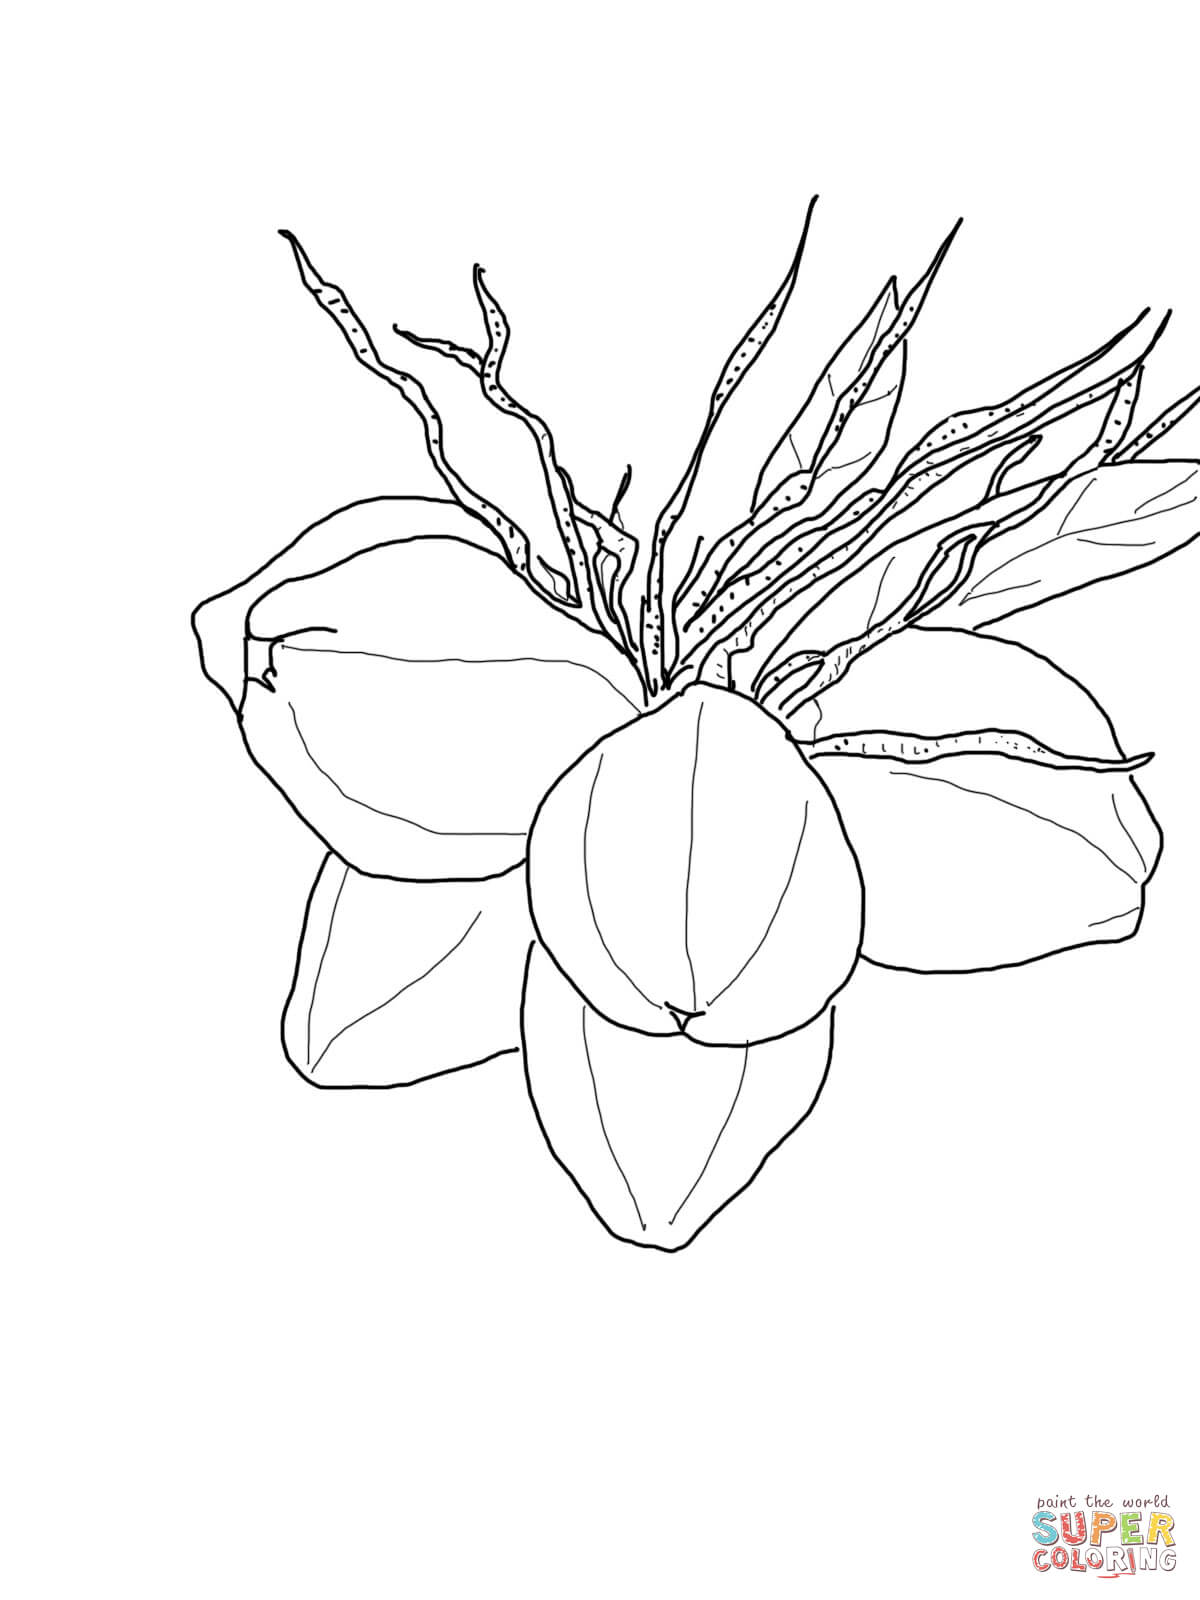 Coconut coloring pages | Free Coloring Pages